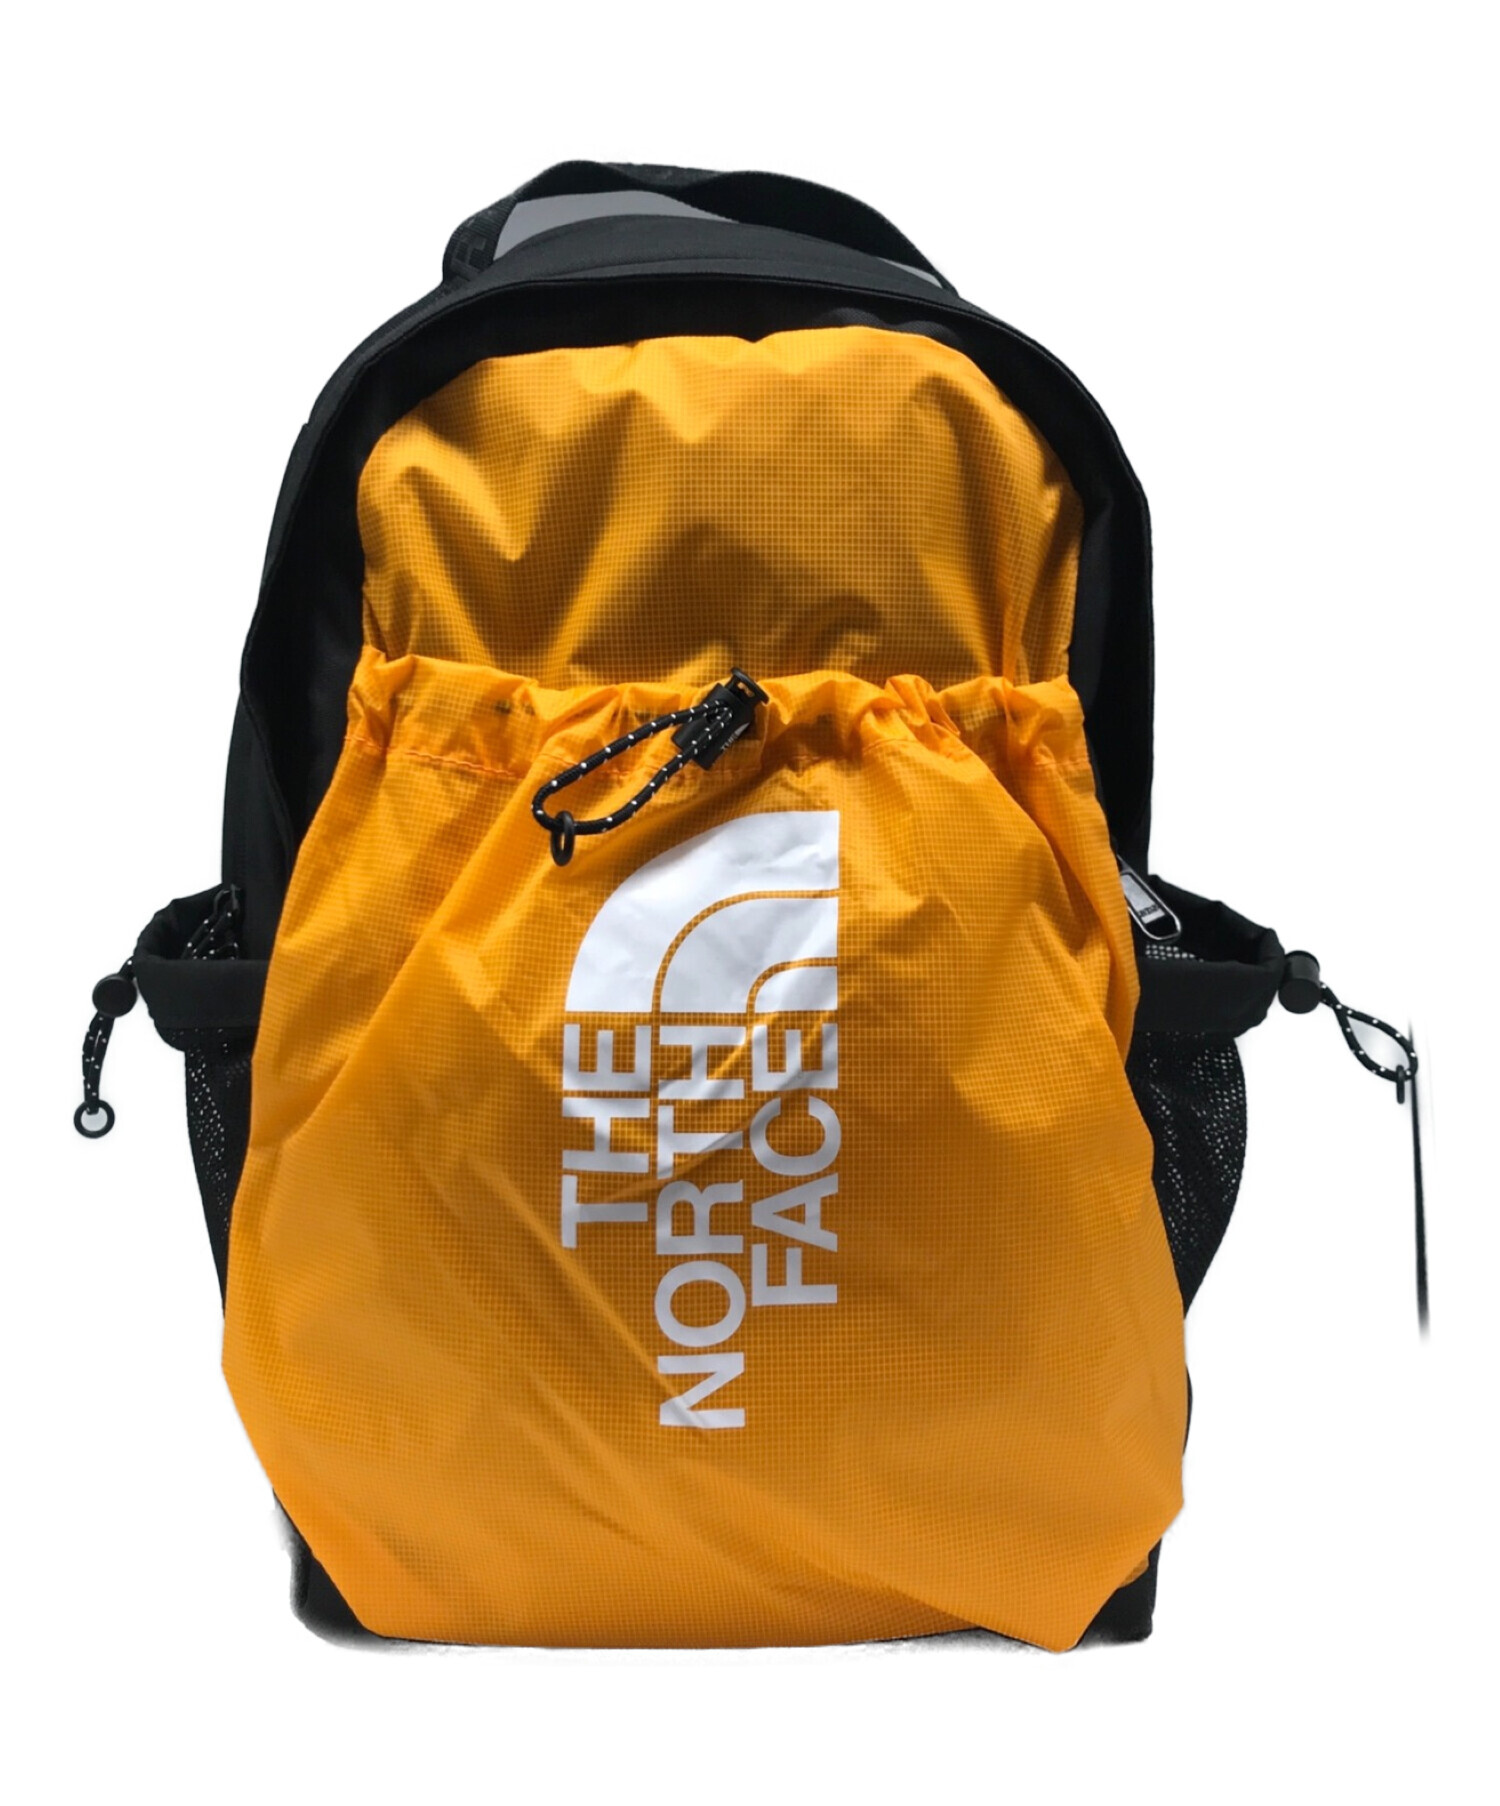 THE NORTH FACE (ザ ノース フェイス) Bozer Backpack　NF0A52TB イエロー